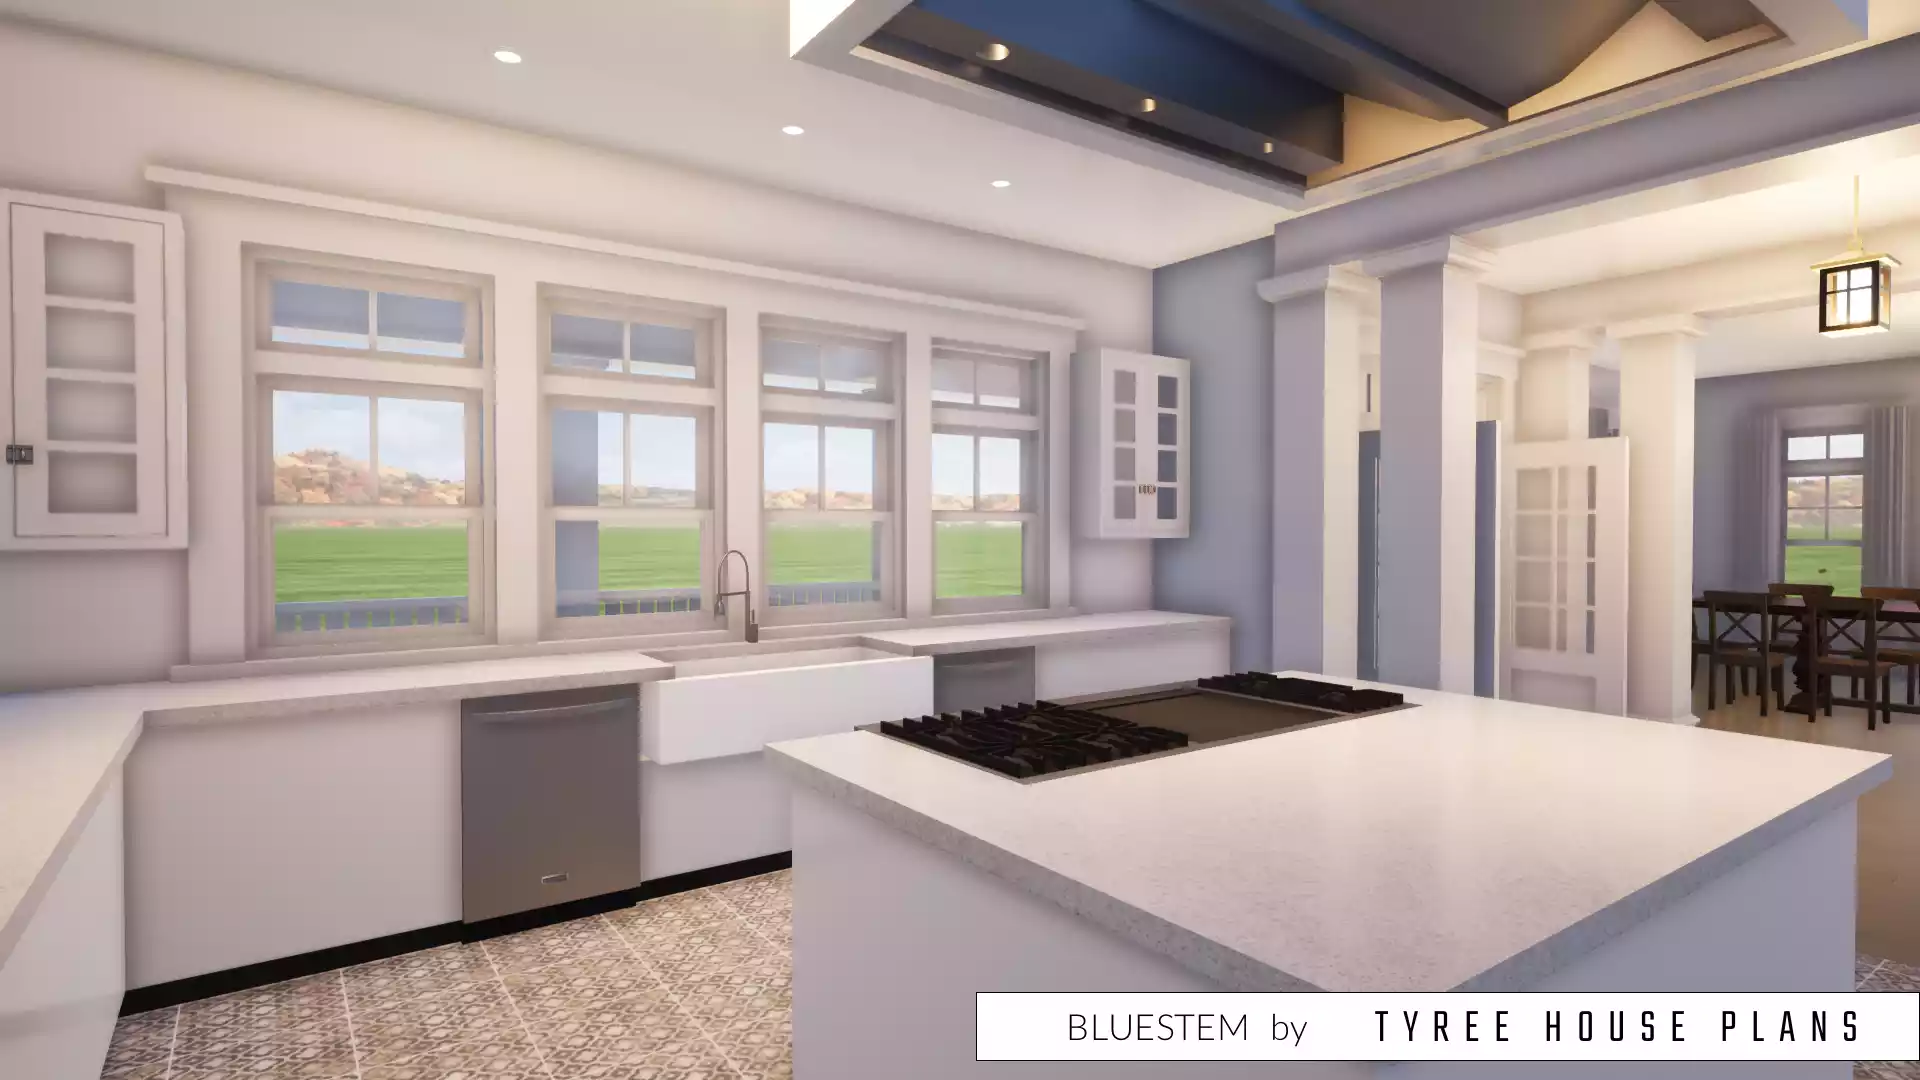 Kitchen with large cooking island. Bluestem by Tyree House Plans.